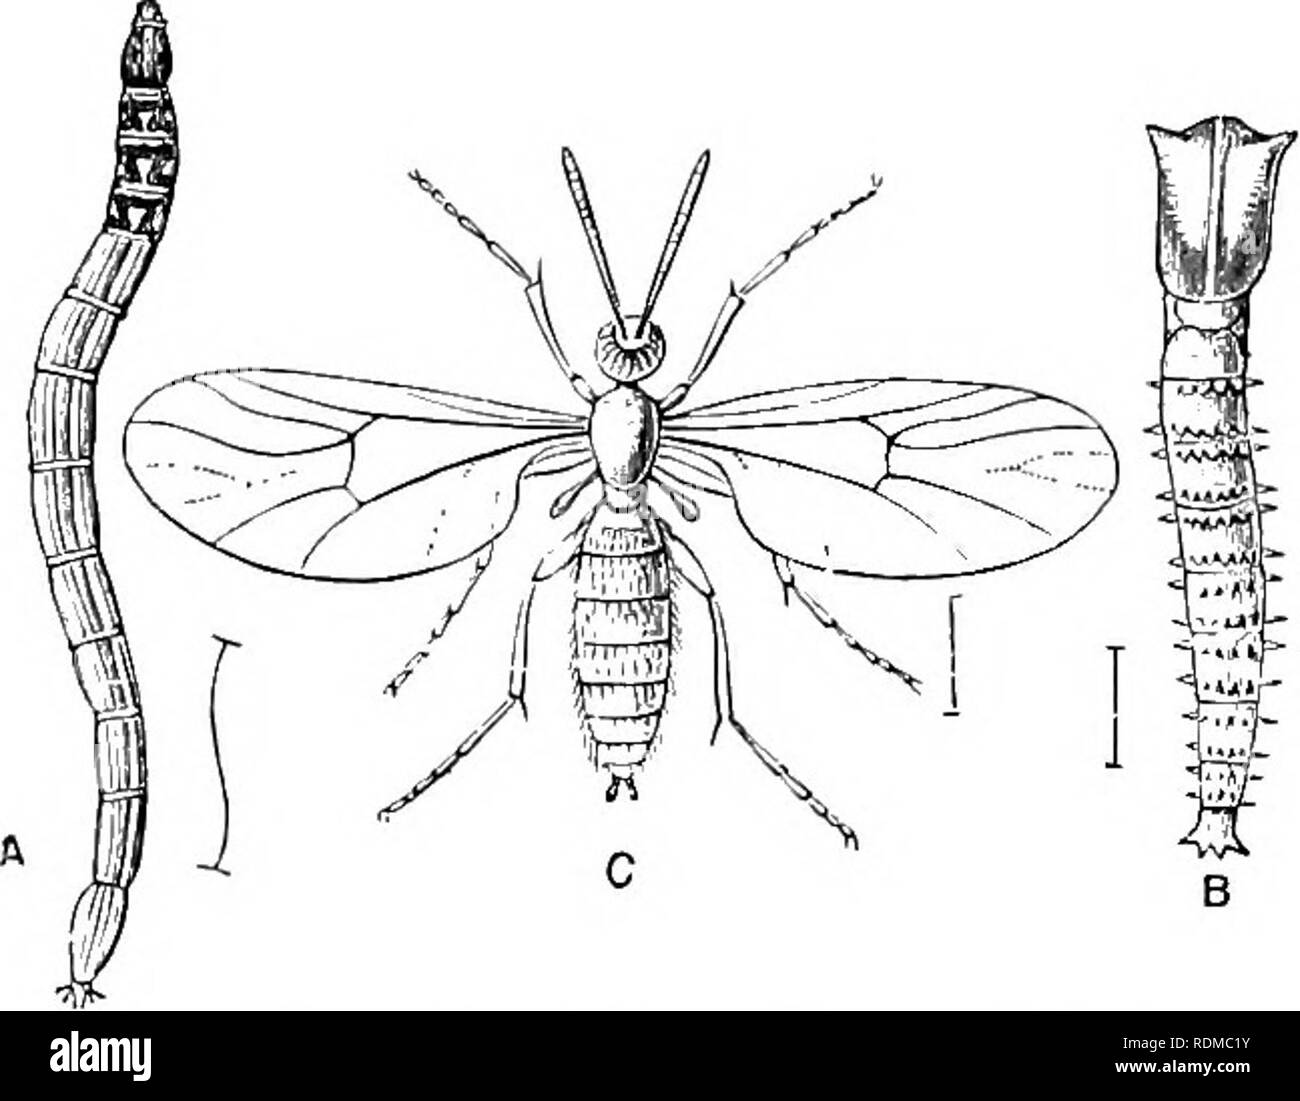 . The Cambridge natural history. Zoology. 462 DIPTERA that does not agree with the larvae of the allied families having well-marked heads (and therefore called Eucephala), nor with the acephalous maggots of Eumyiidae. Fam. 2. Mycetophilidae.—These small flies are much less delicate creatures than the Cecidomyiidae, and have more nervures in the ivings ; they possess ocelli, and freqiiently have the coxae elongated, and in some cases the legs adorned with complex arrange- ments of spines : their antennae have not whorls of hair. Although very much neglected there are probably between 700 and 10 Stock Photo